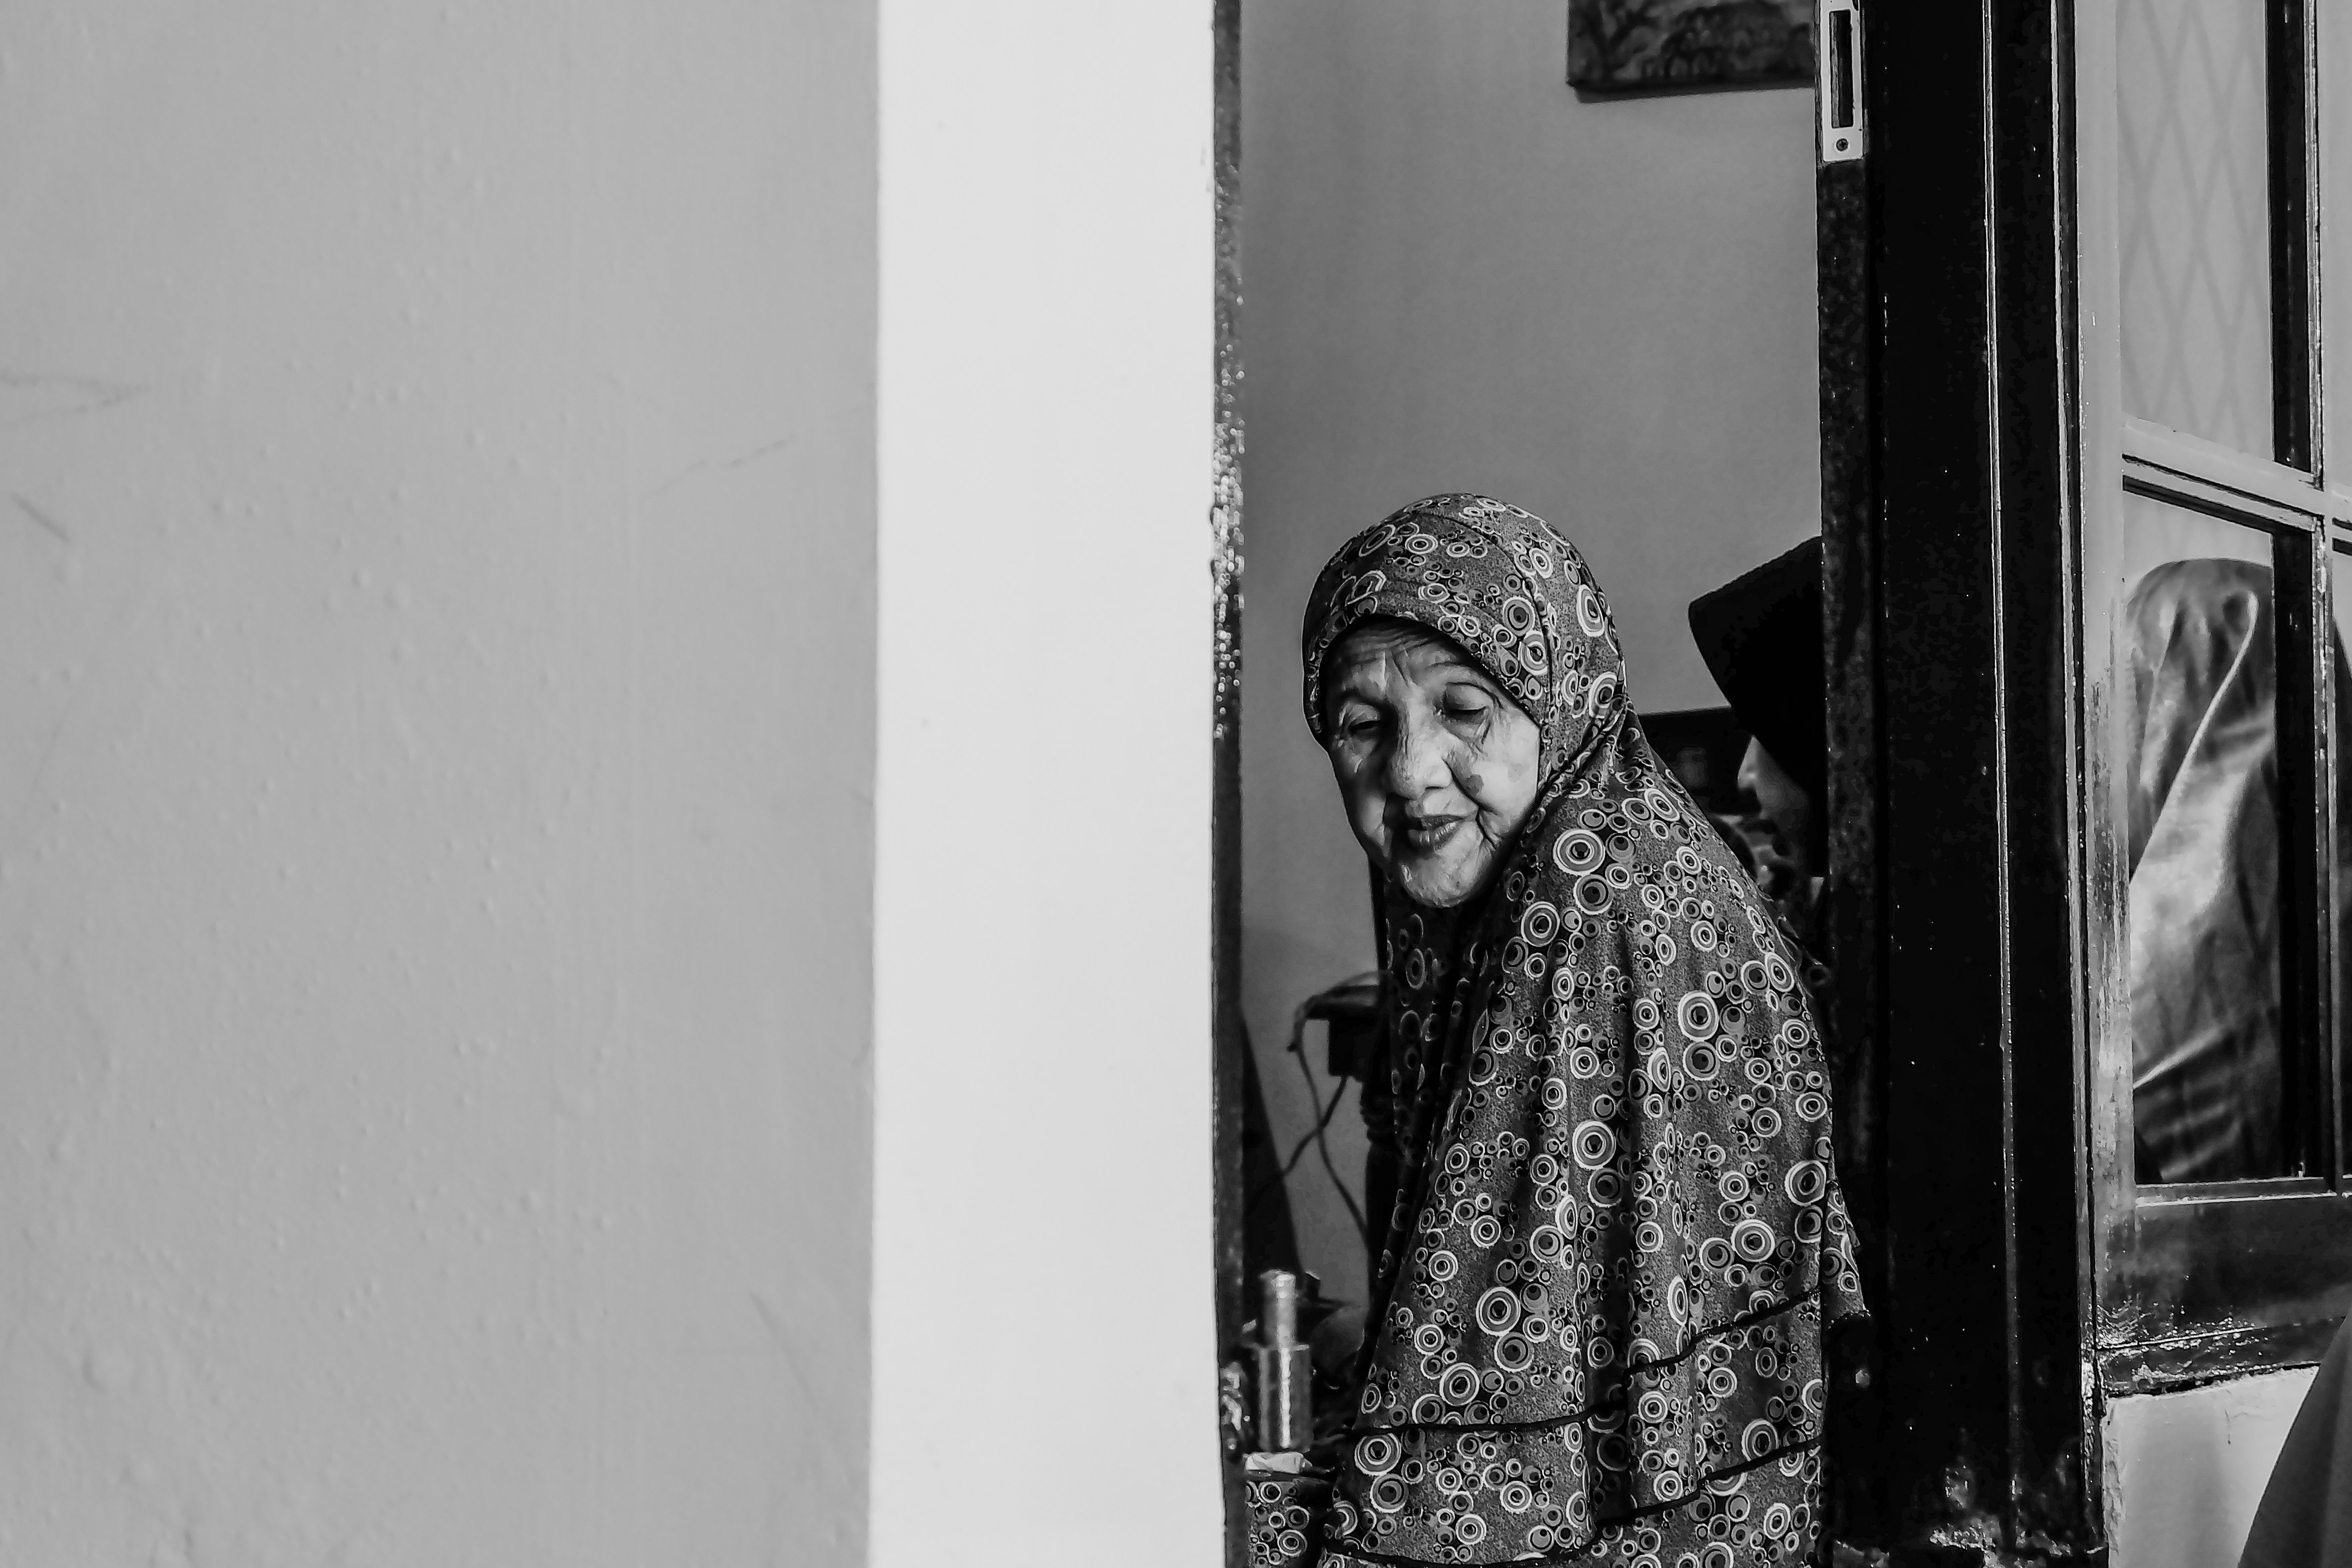 Ageing of migrant women: the story of multiple discrimination